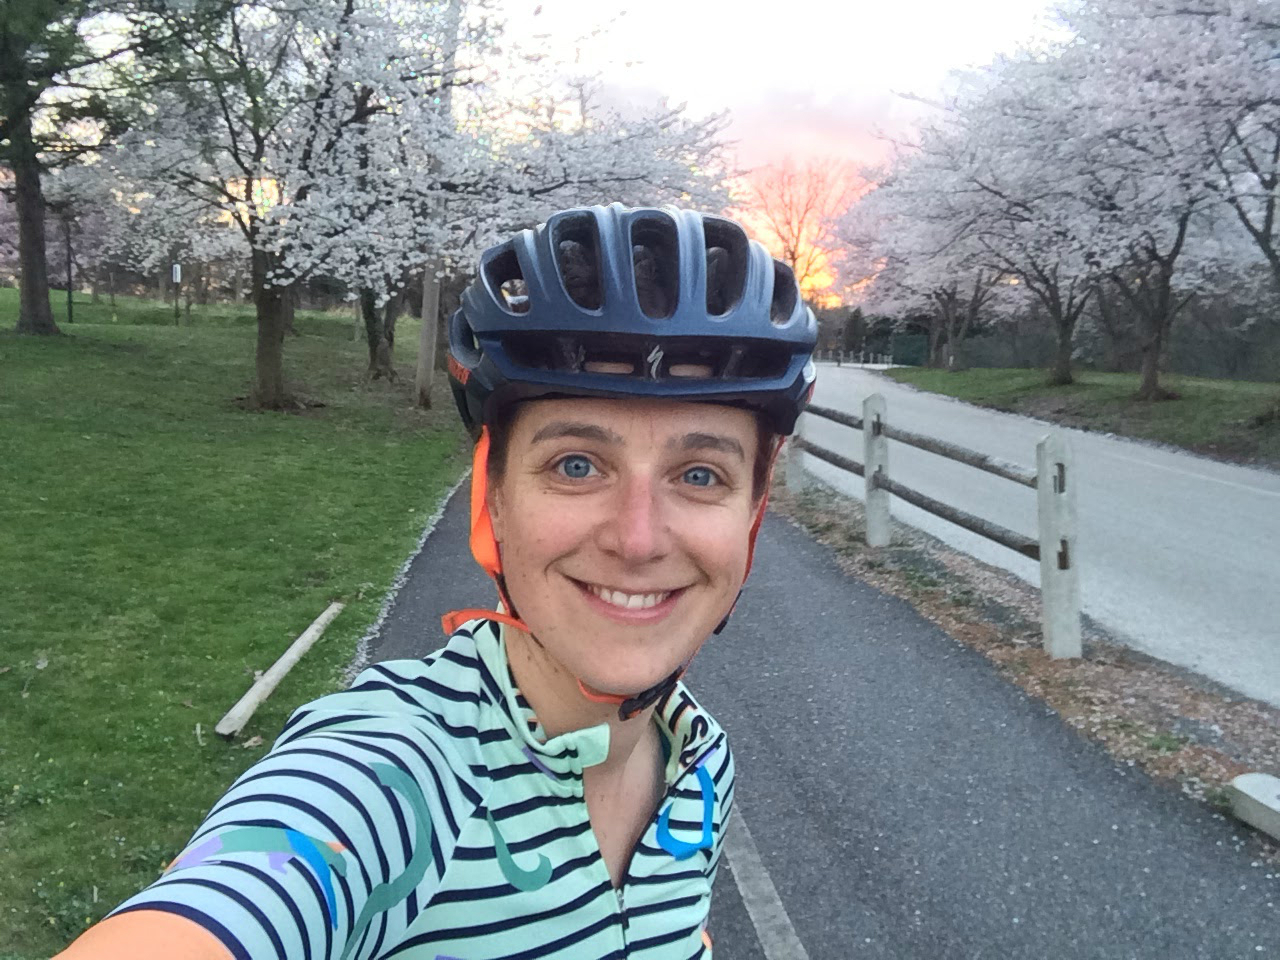 'Selfie' of a person wearing a bike helmet with cherry trees and a sunset in the background